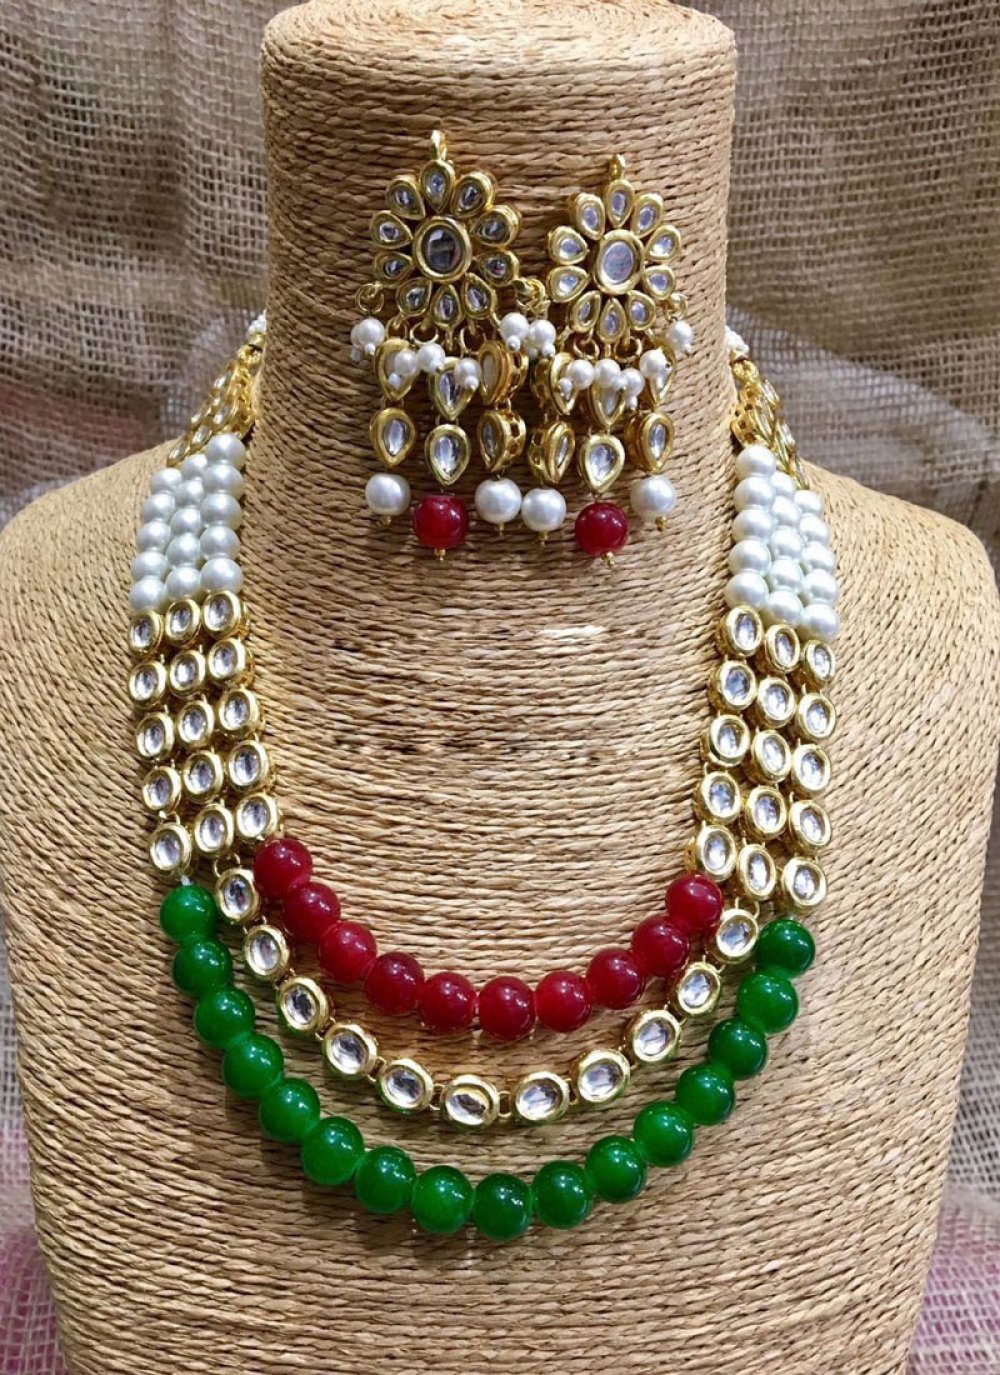 White Colour Beads Pendant with Beads Necklace India Jewellery Saree Salwar